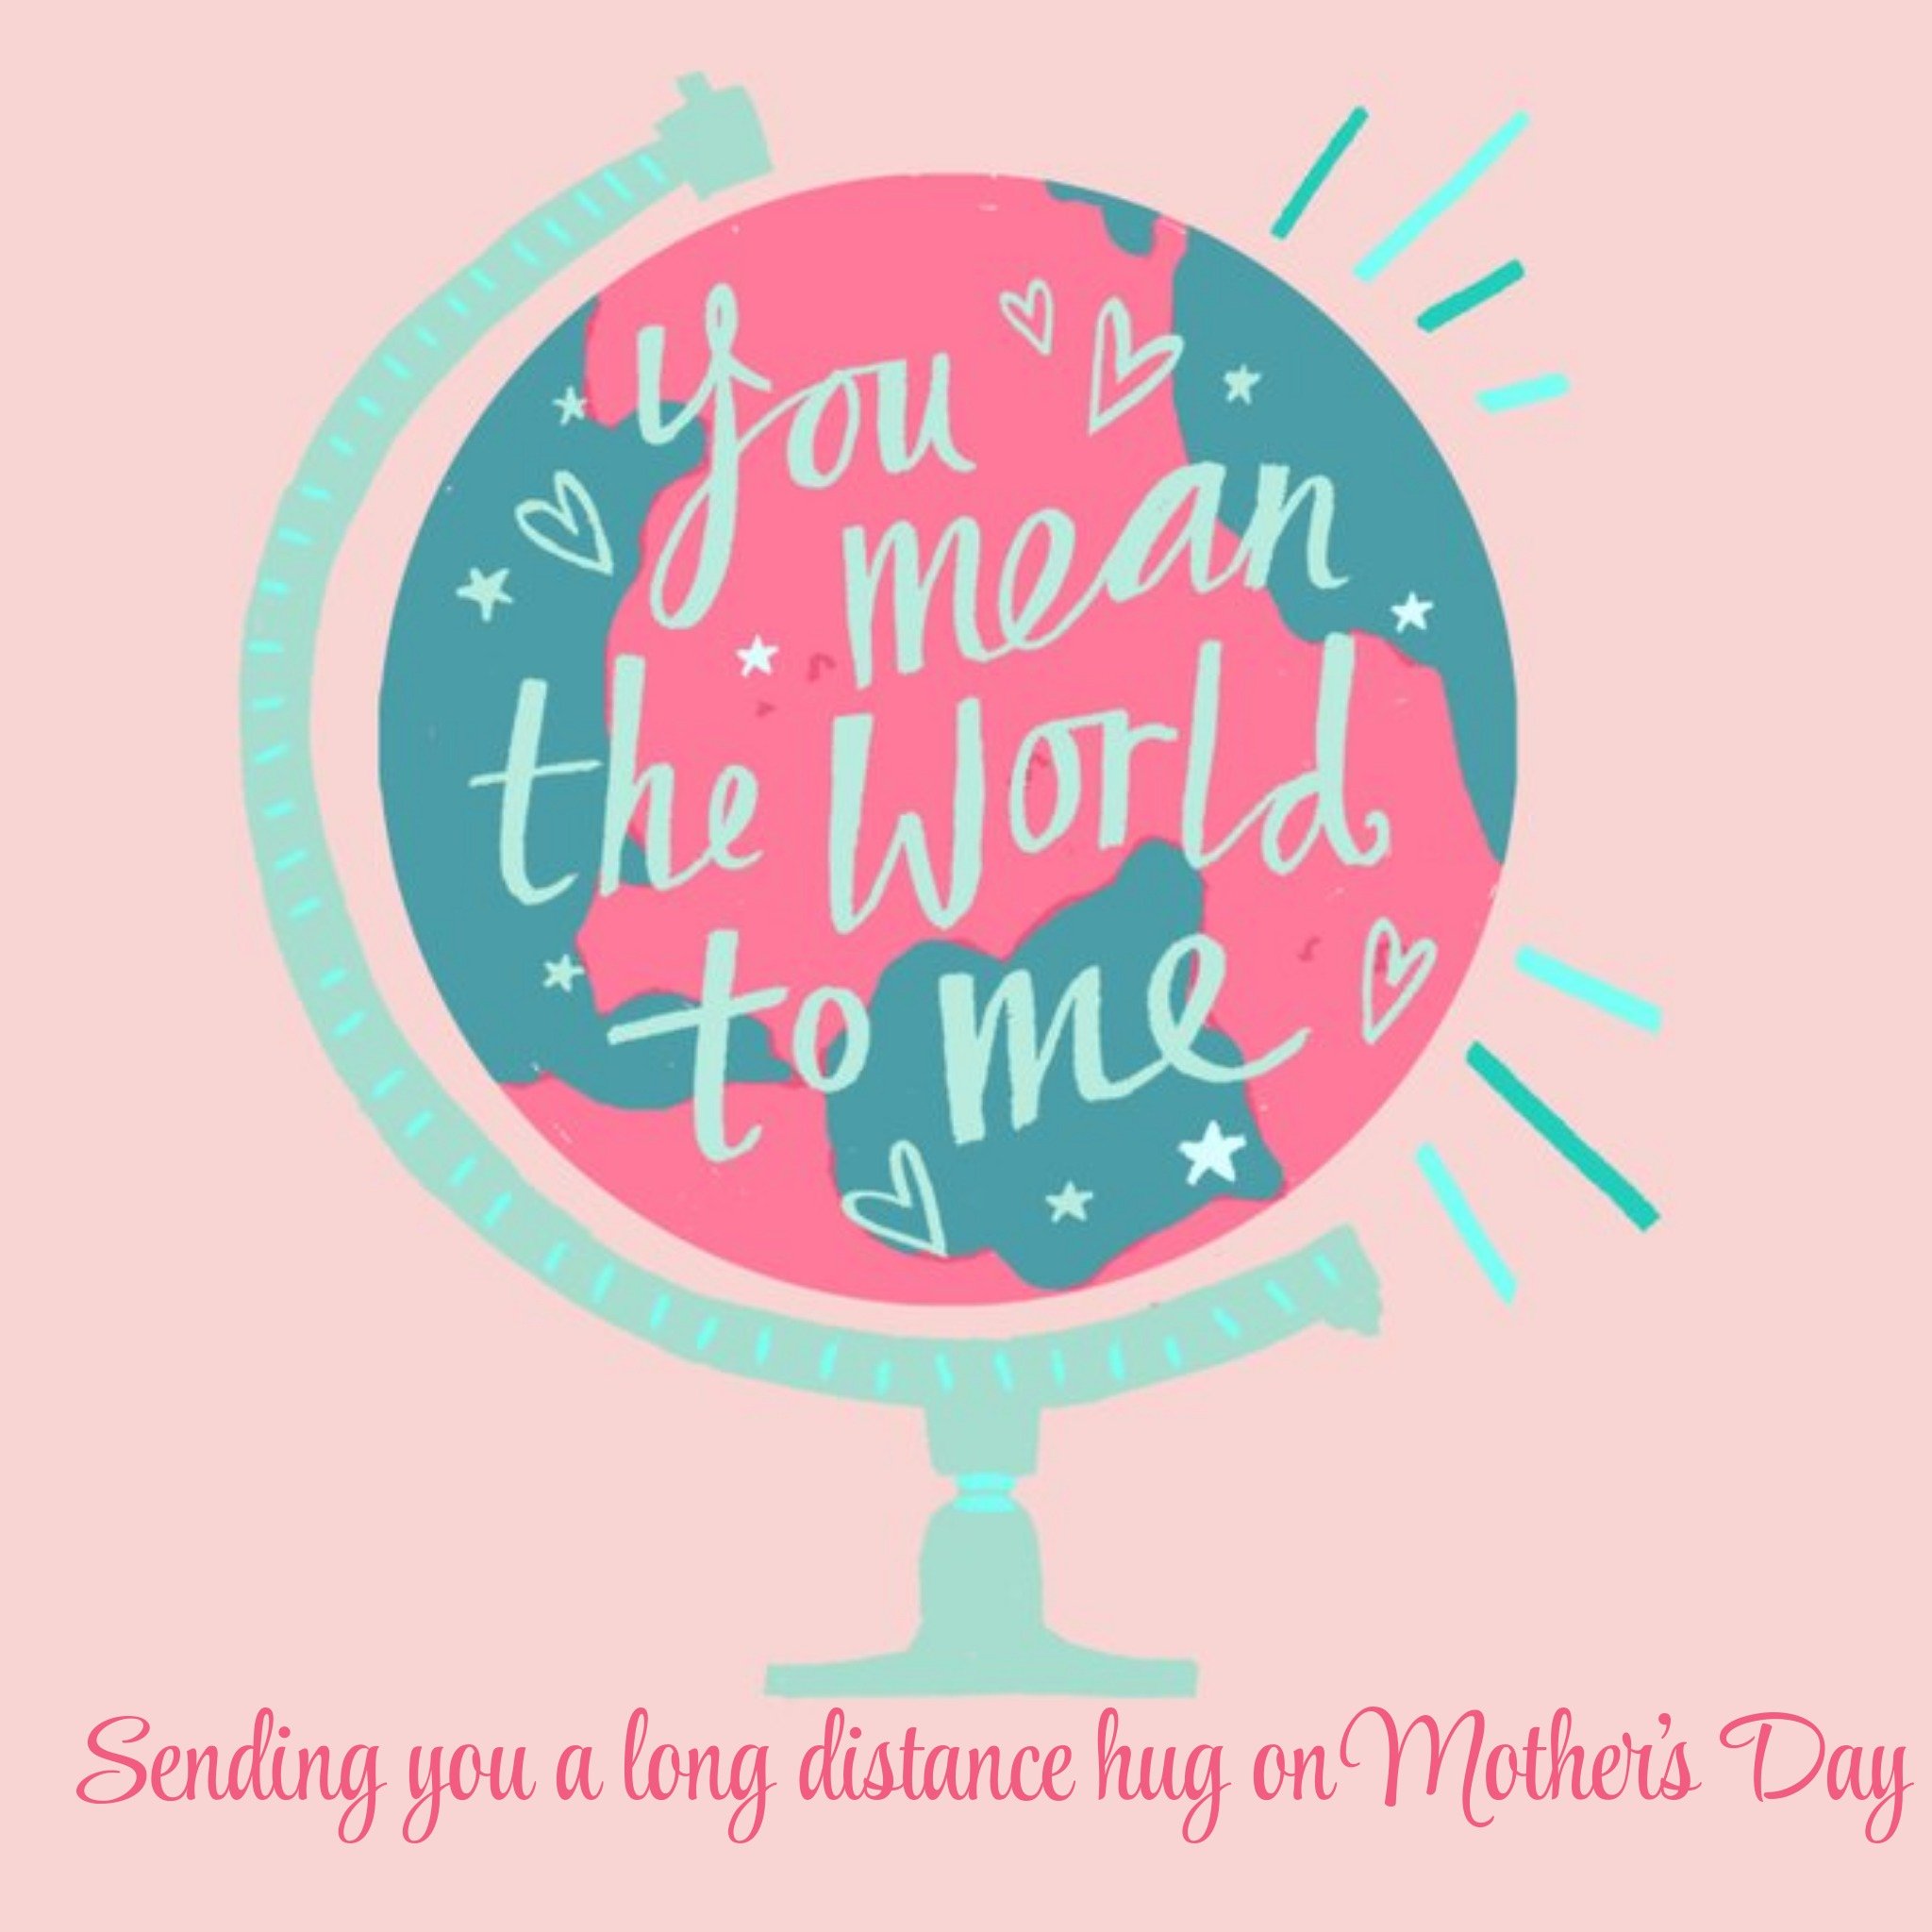 Moonpig Retro Globe Design Sending You A Long Distance Hug On Mother's Day Card, Square